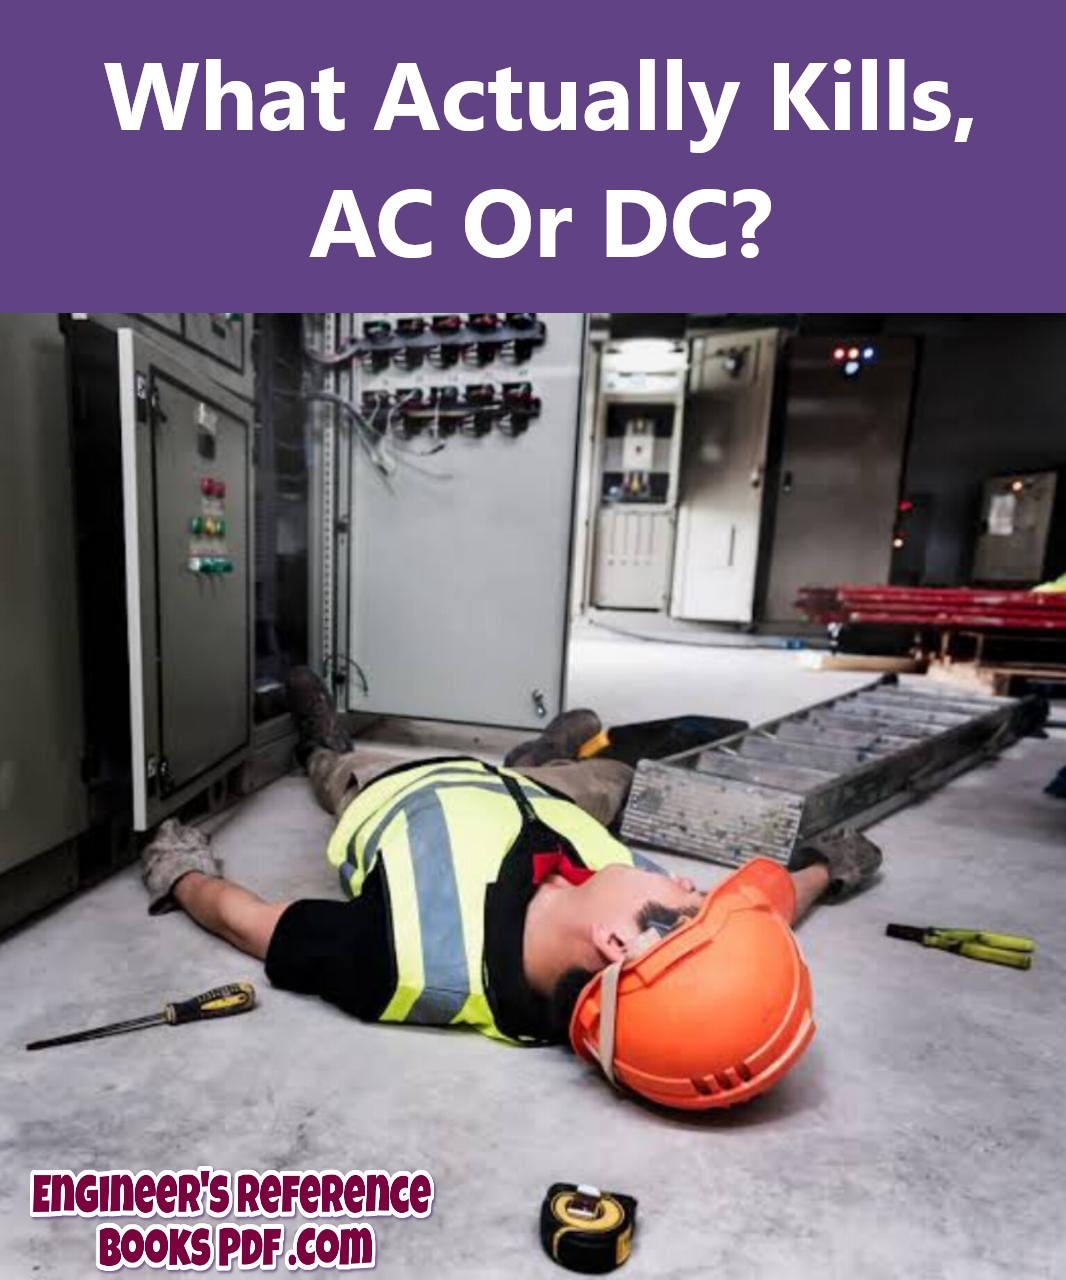 What Actually Kills, AC Or DC?